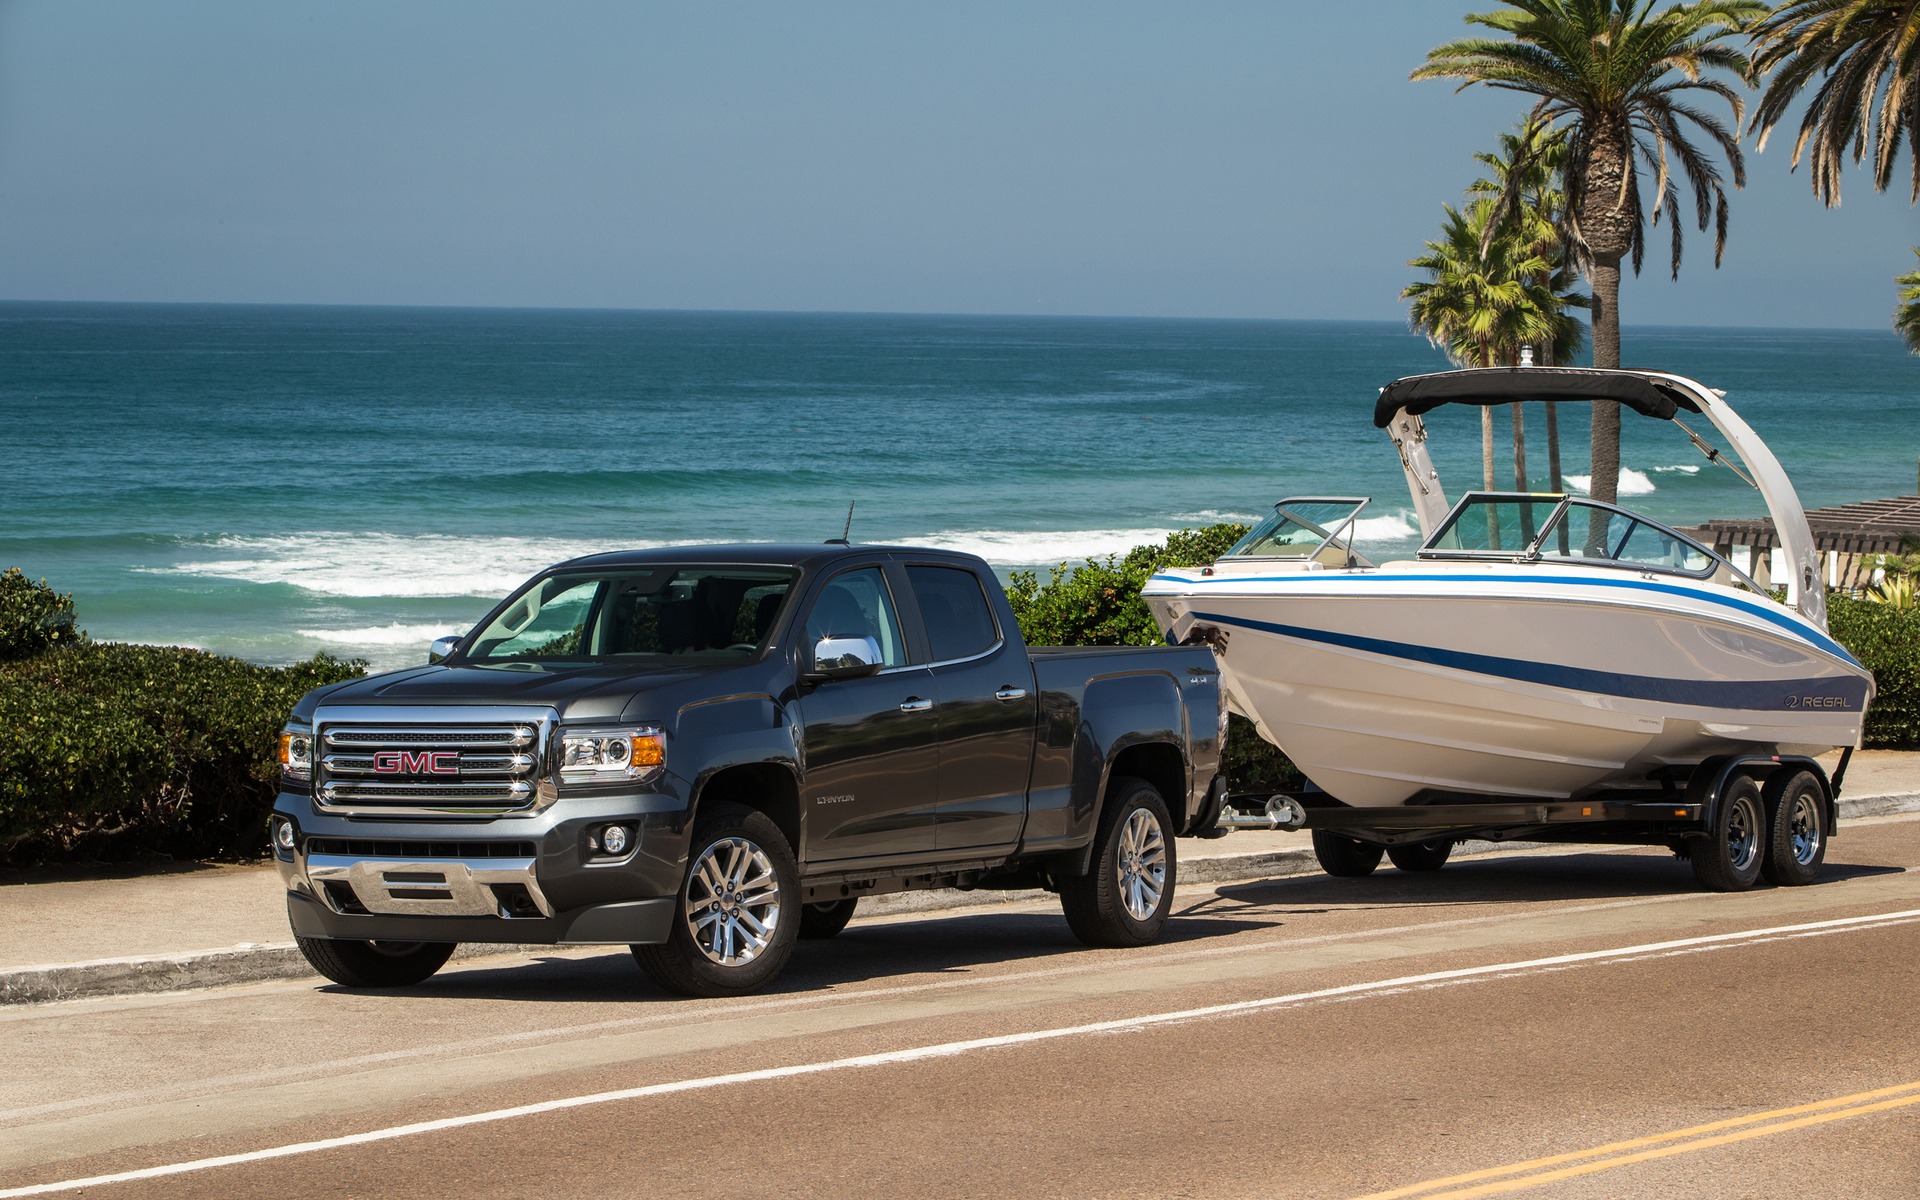 The V6 engine helps tow loads of up to 7,000 pounds.